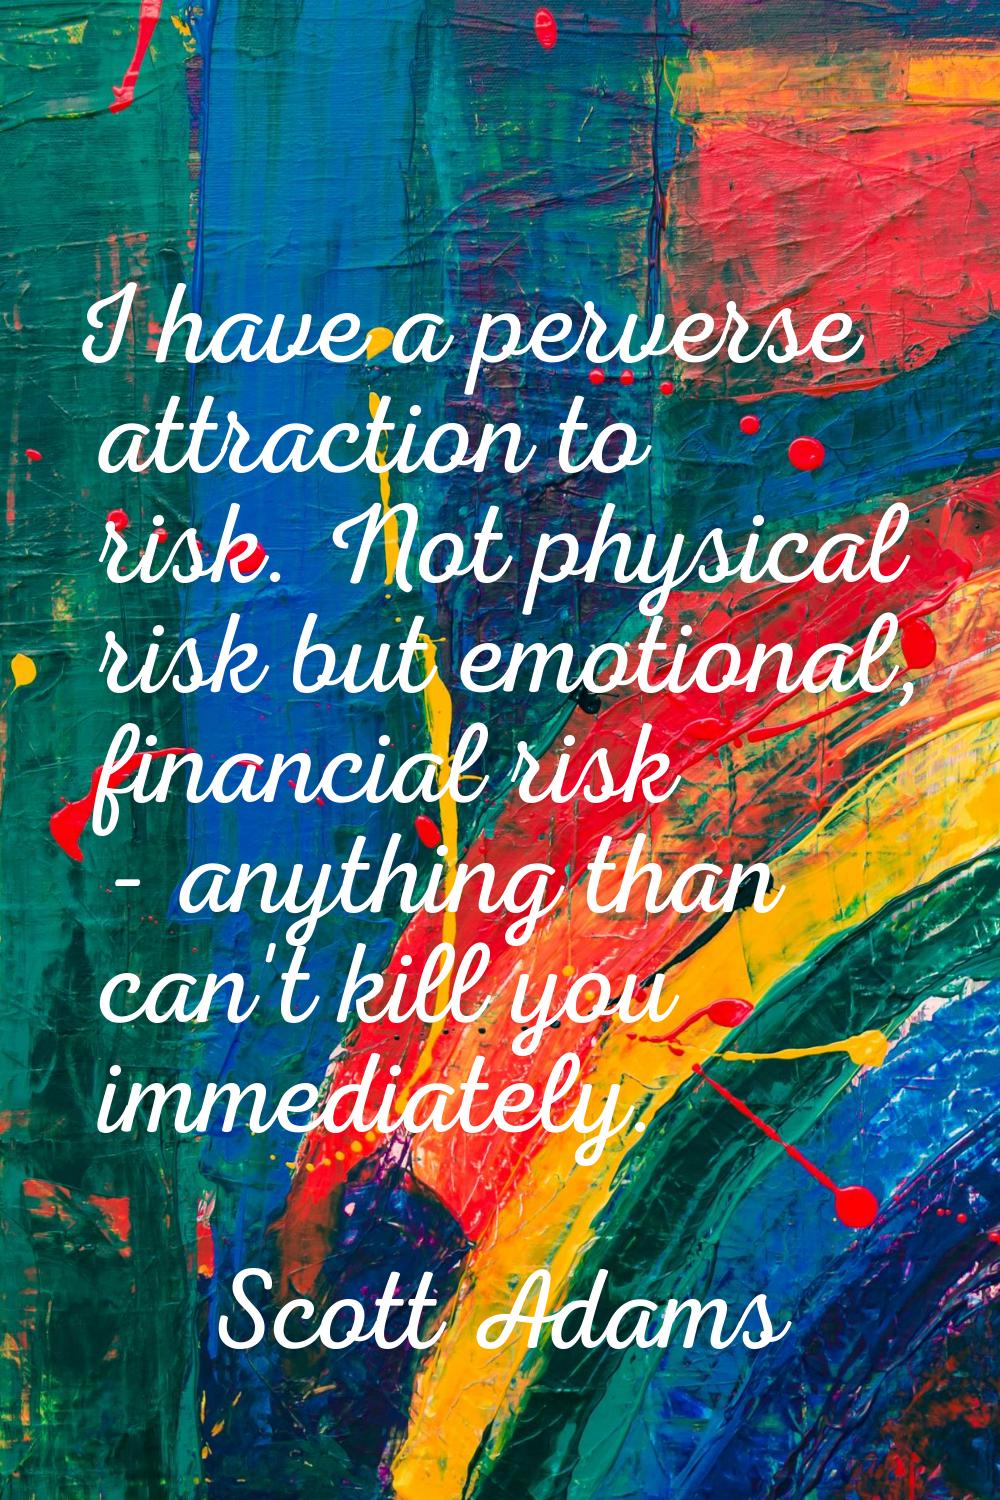 I have a perverse attraction to risk. Not physical risk but emotional, financial risk - anything th